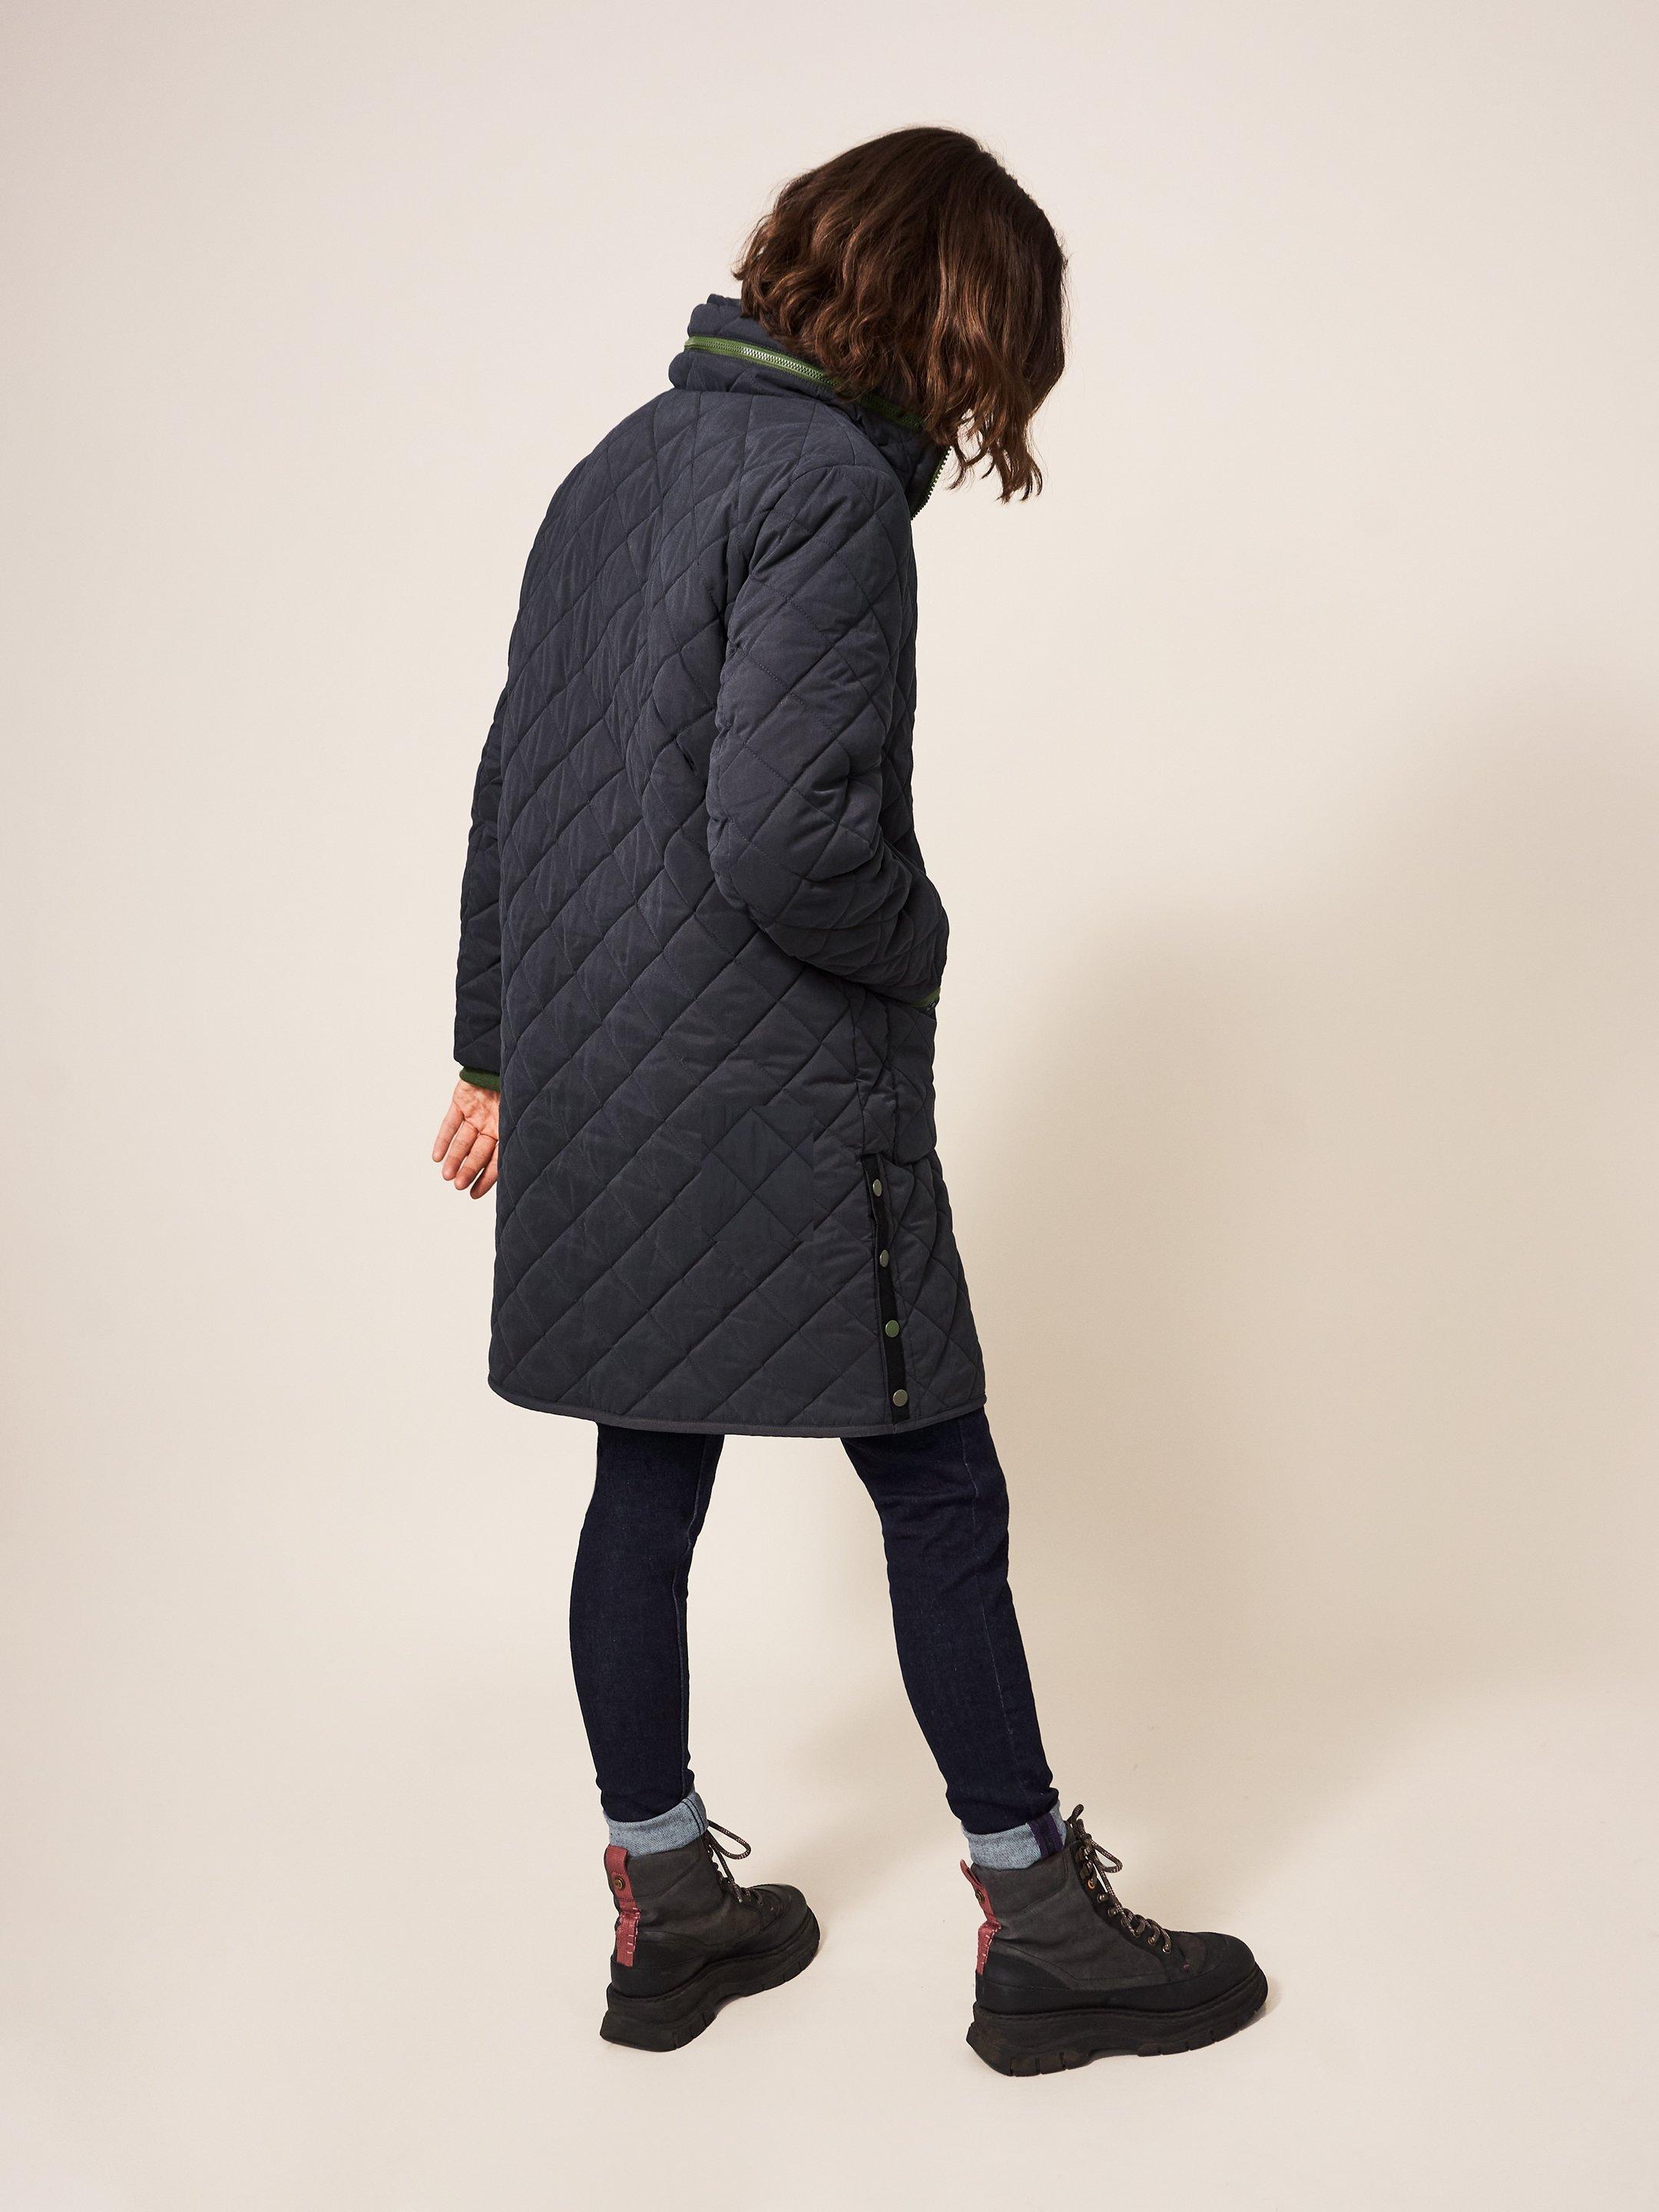 Luckie Quilted Coat in DK GREY - MODEL BACK